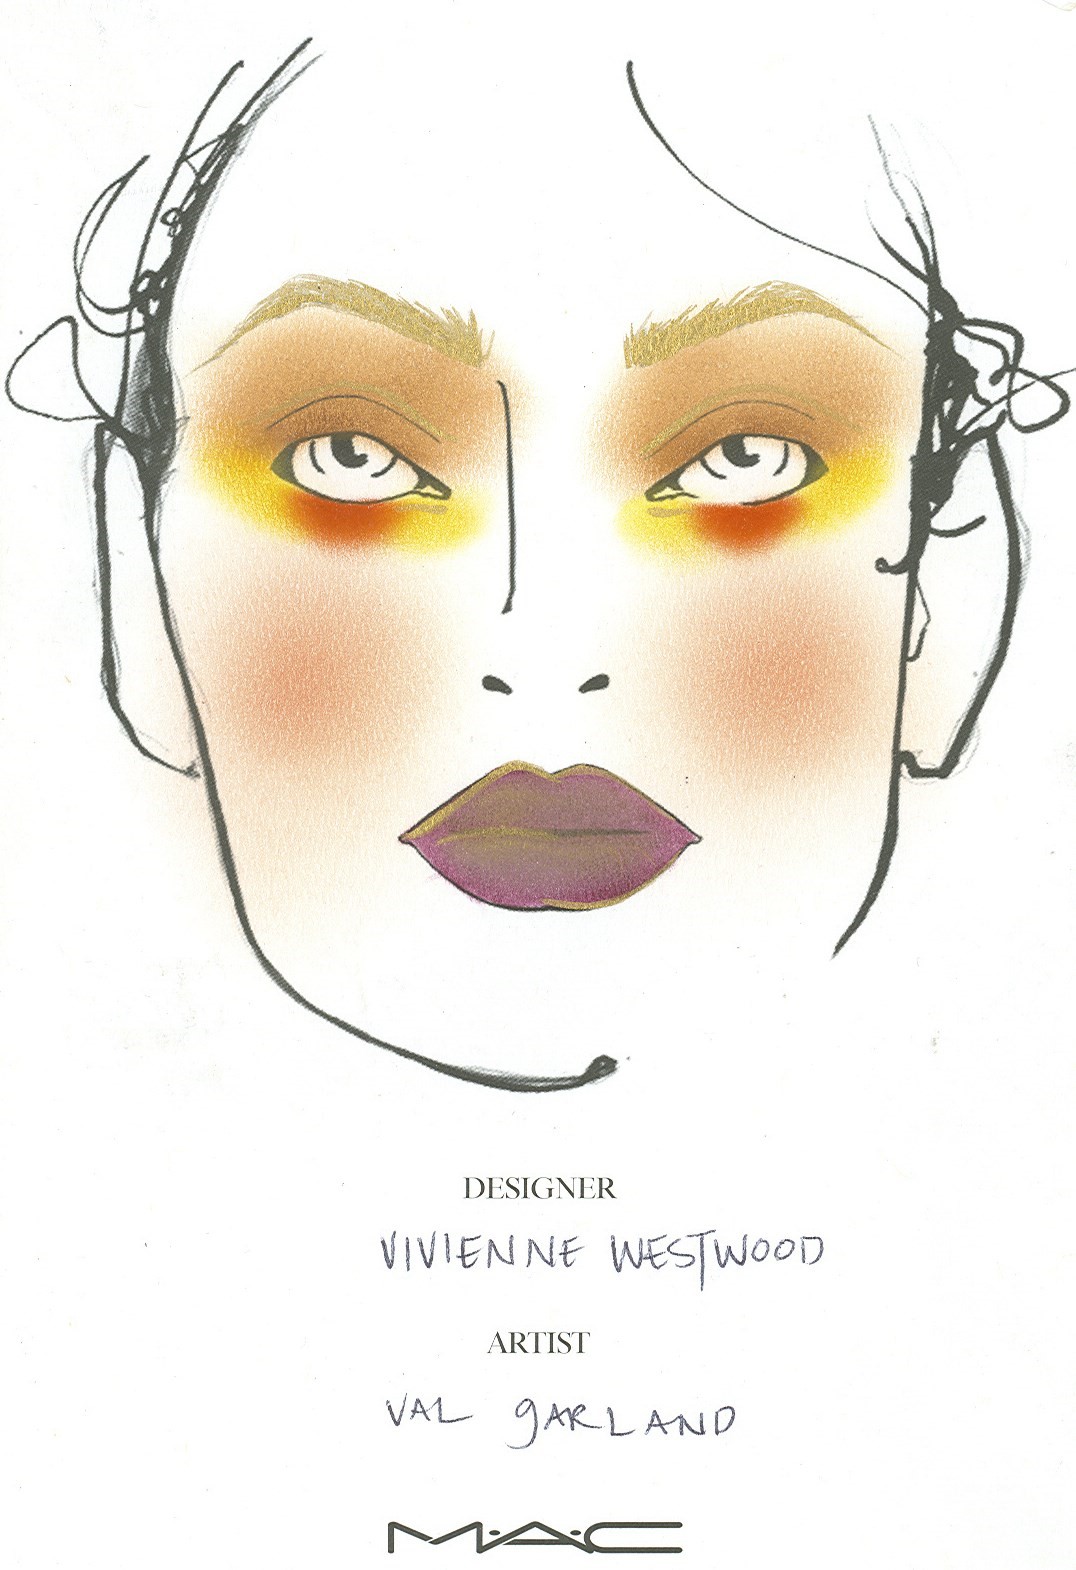 Ten Years of MAC and Vivienne Westwood on the Catwalk